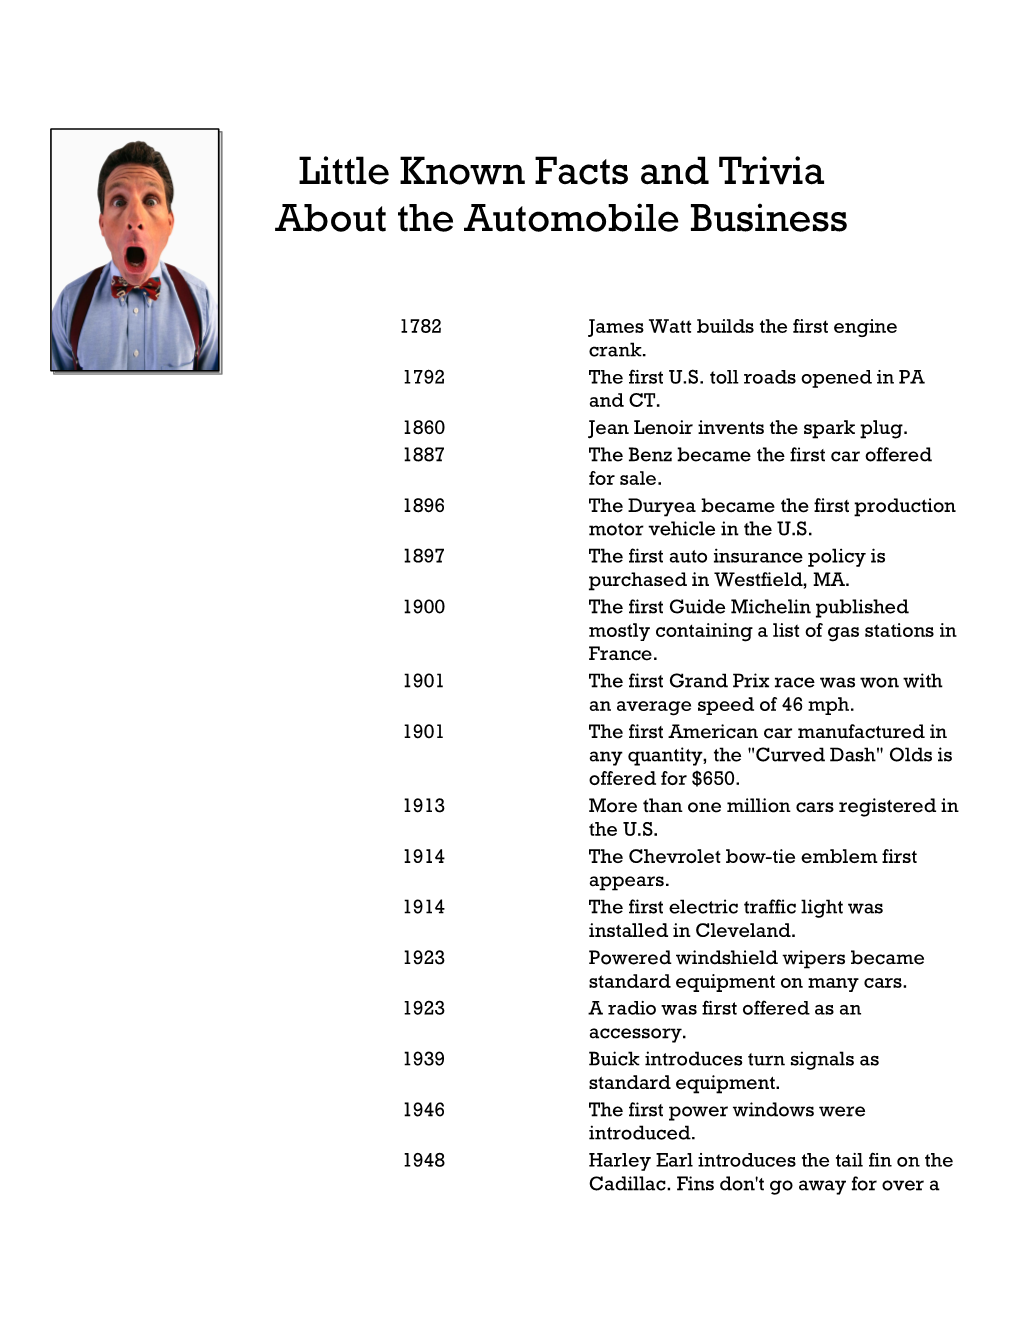 Little Known Facts and Trivia About the Automobile Business